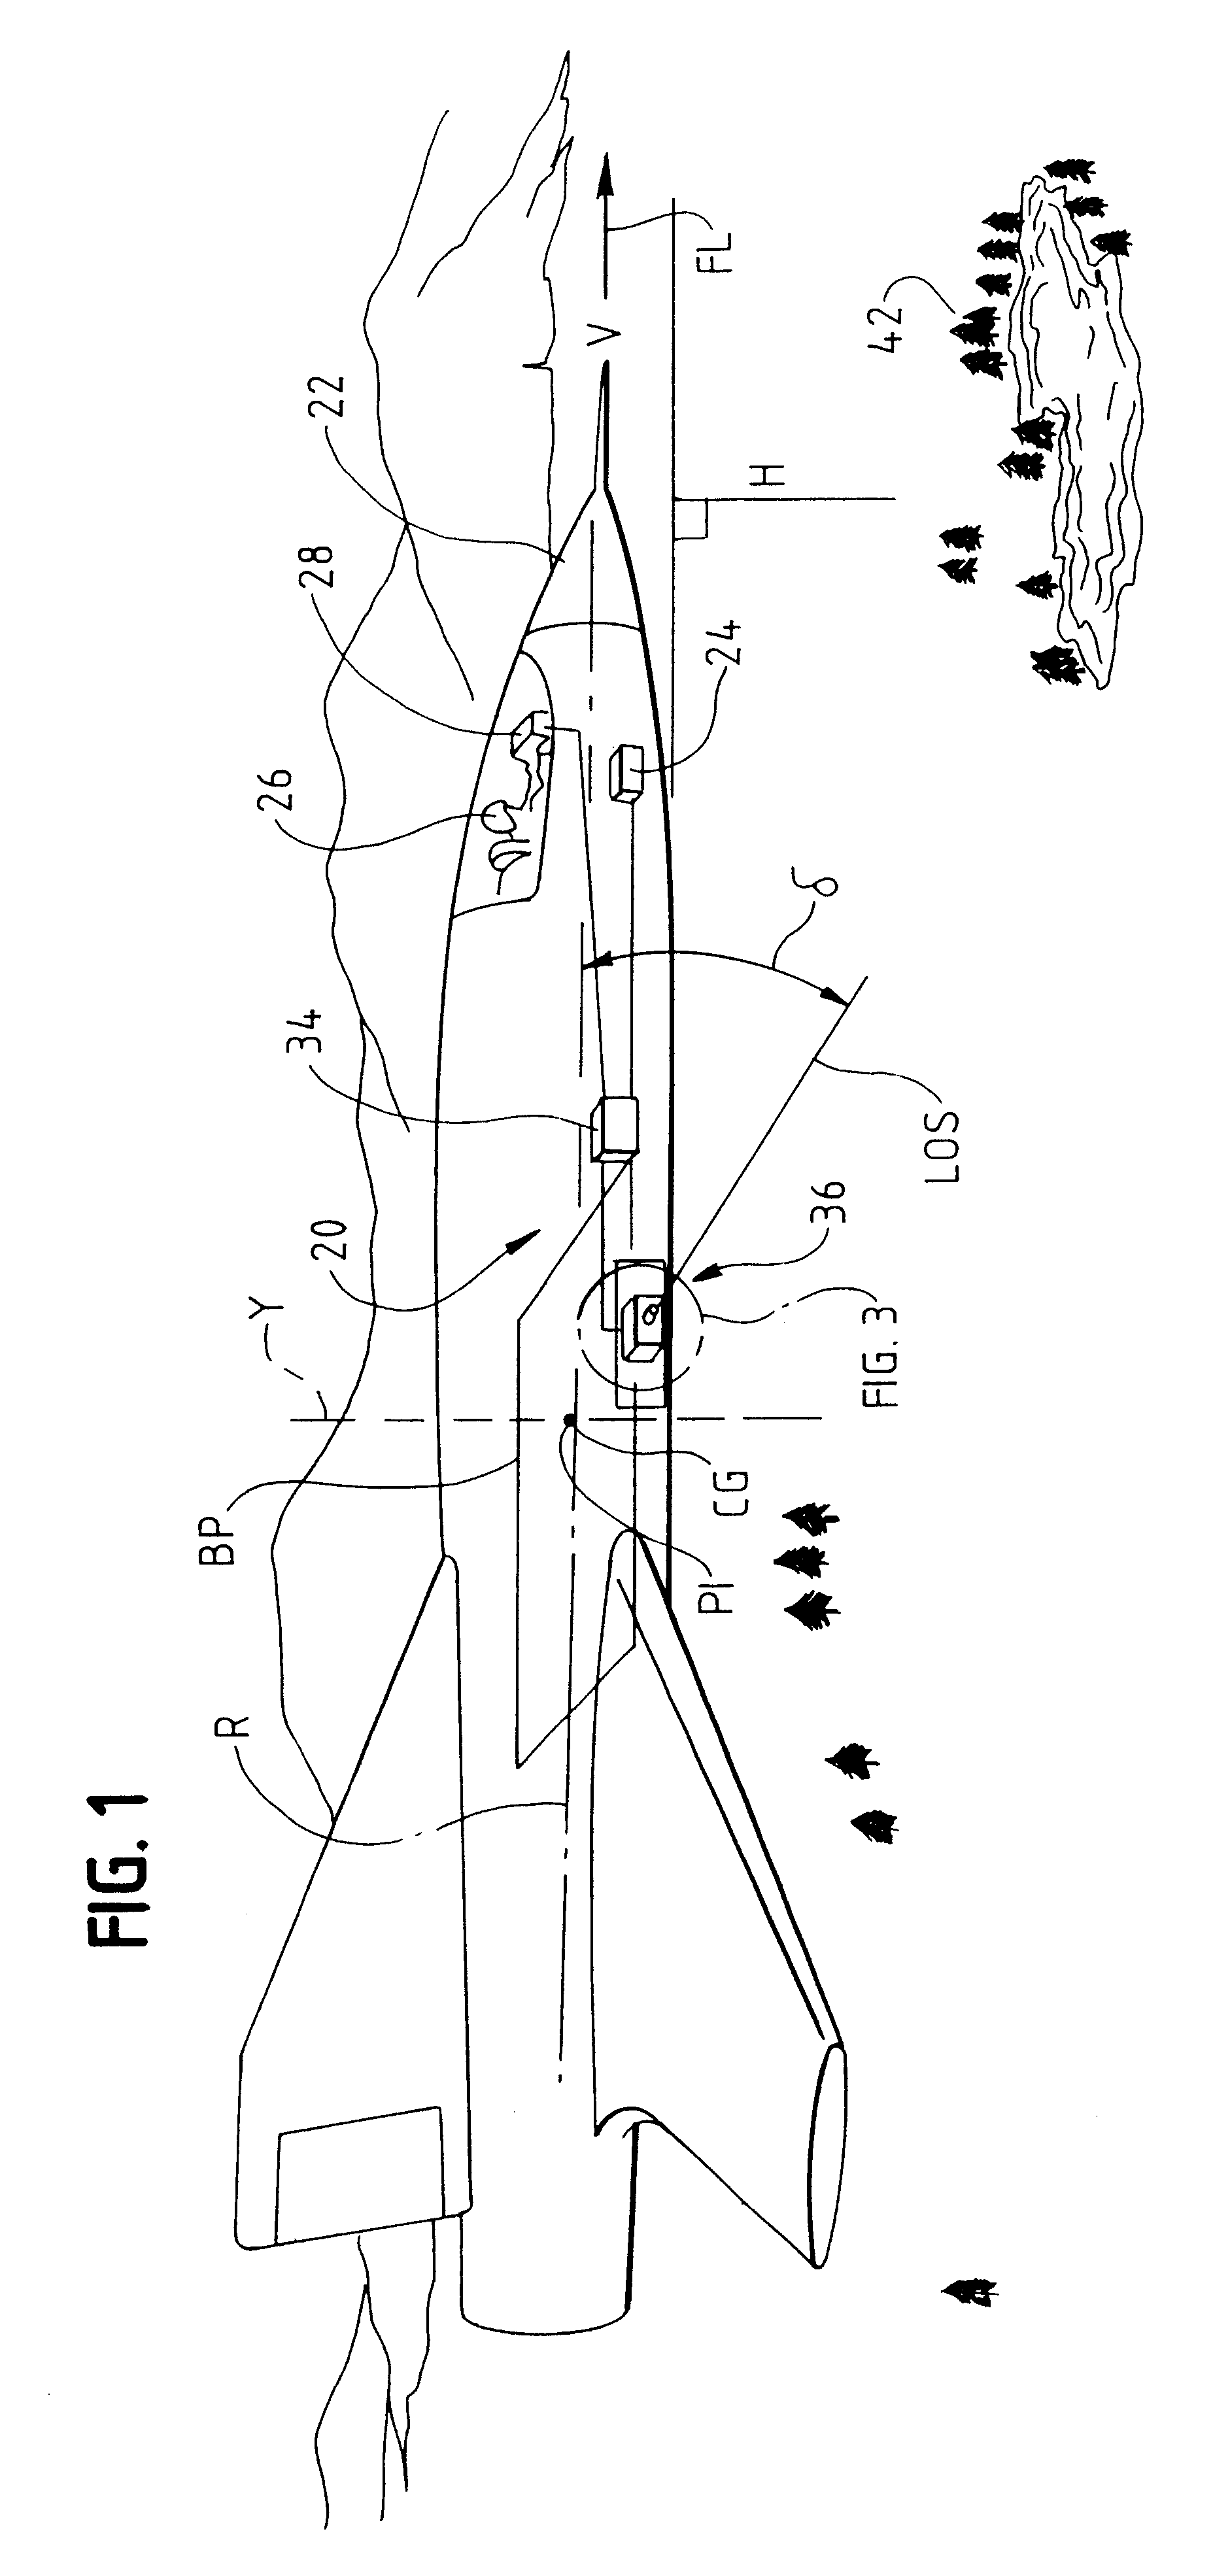 Method of framing reconnaissance with motion roll compensation